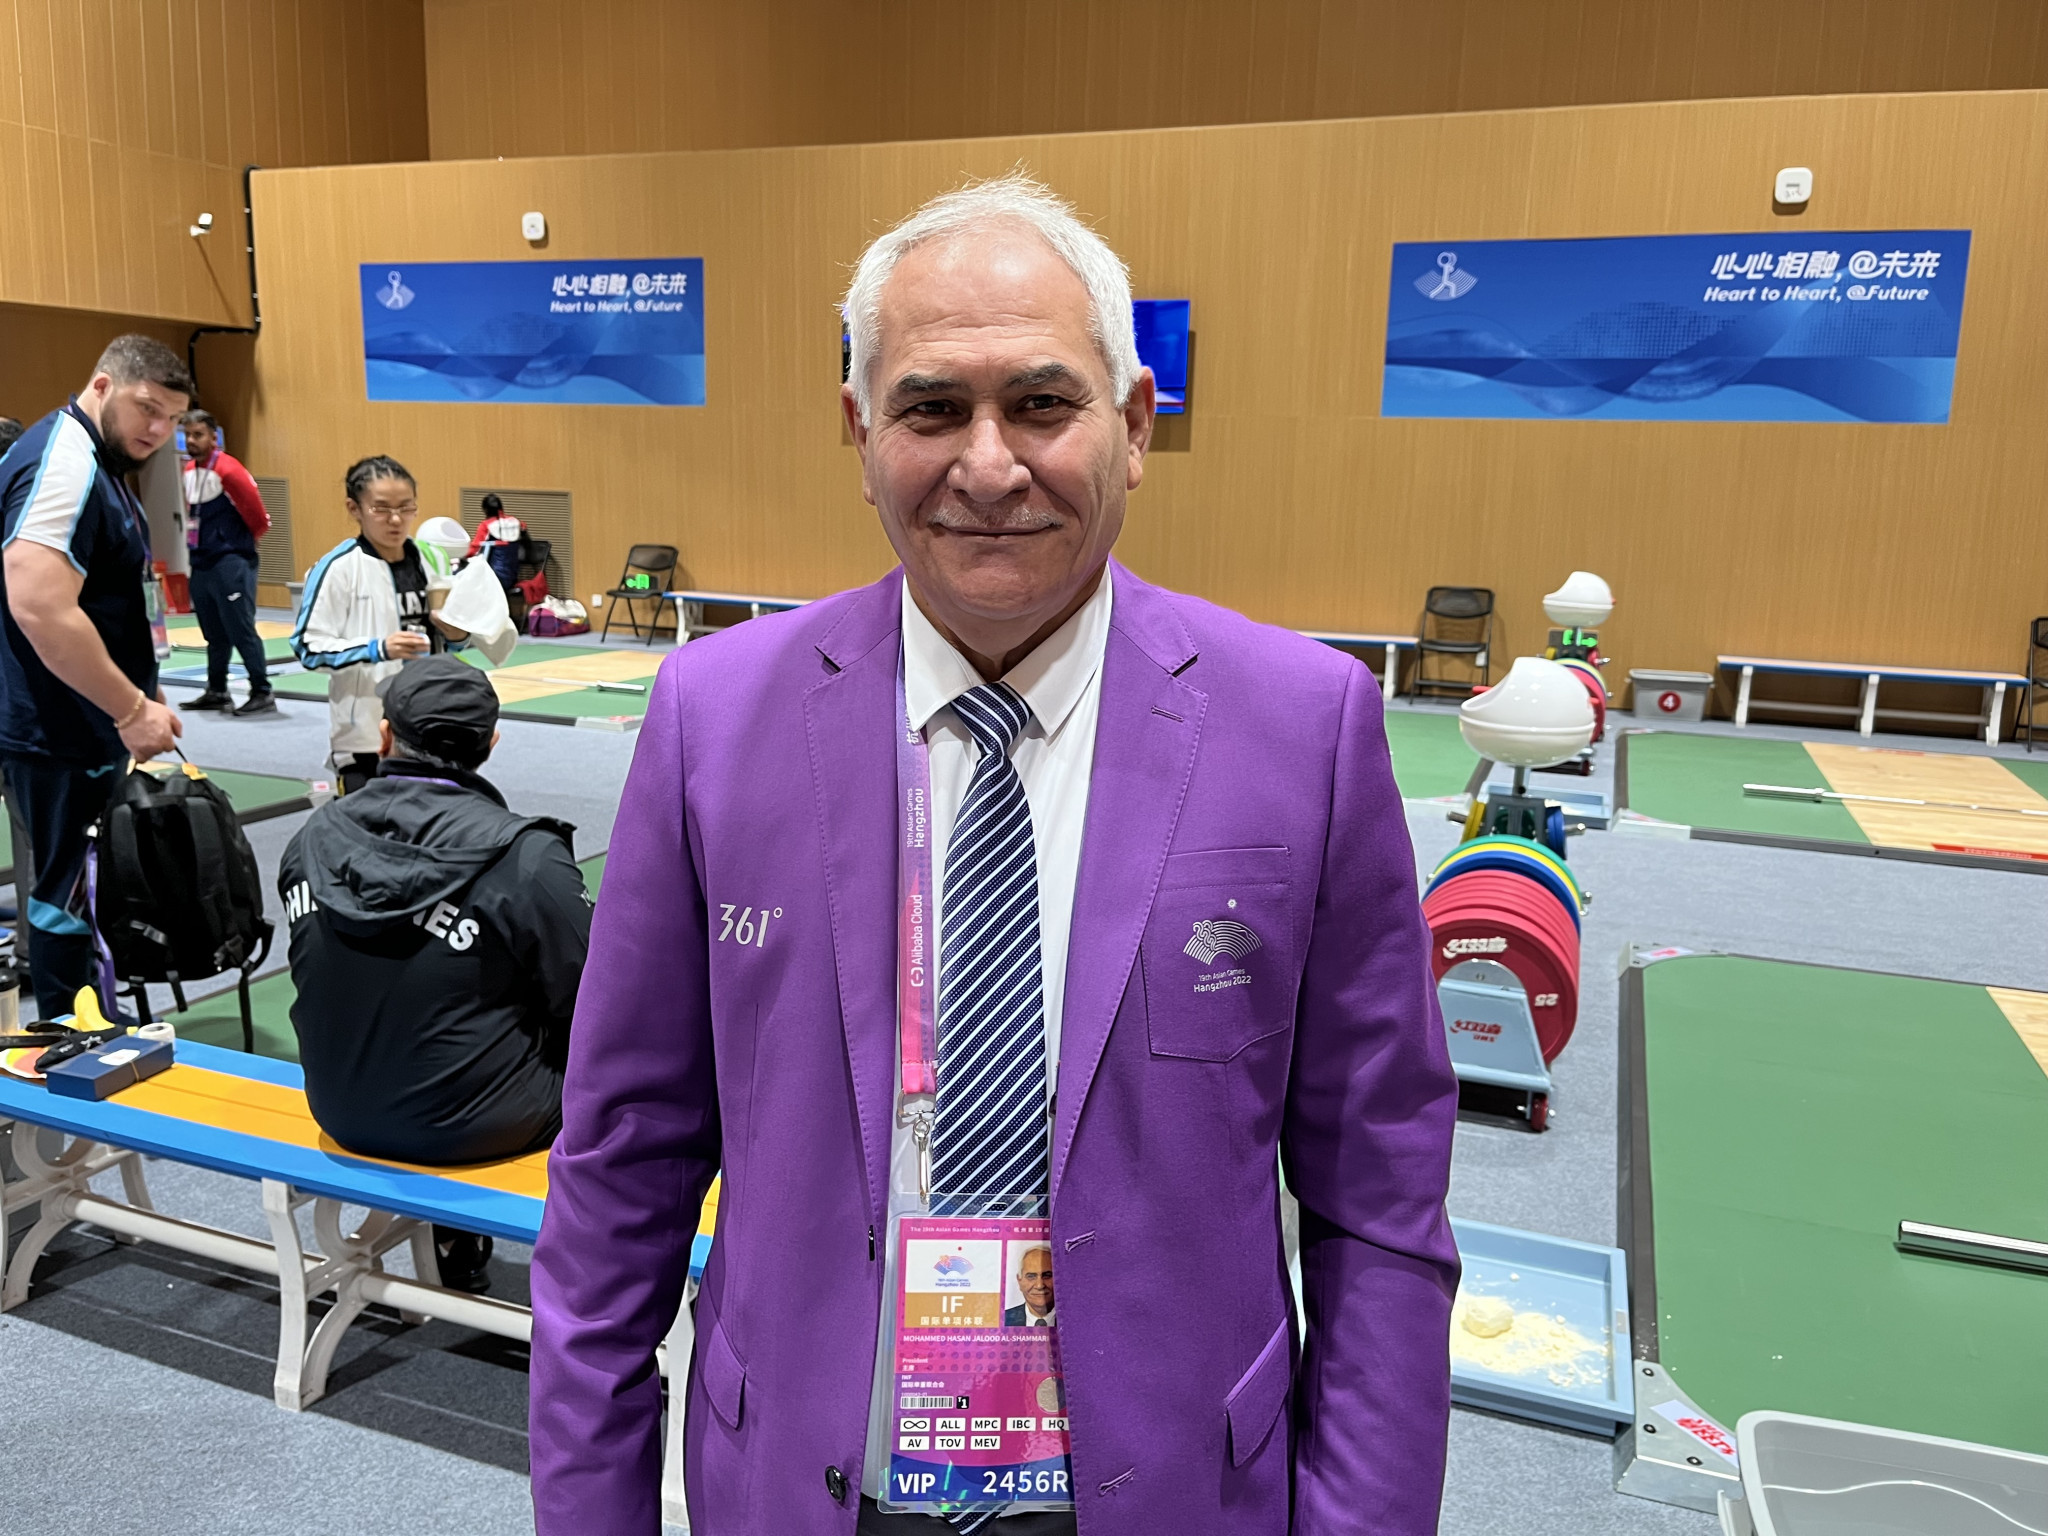 IWF President Mohammed Jalood was praised by his colleagues for his part in weightlifting's reforms ©ITG